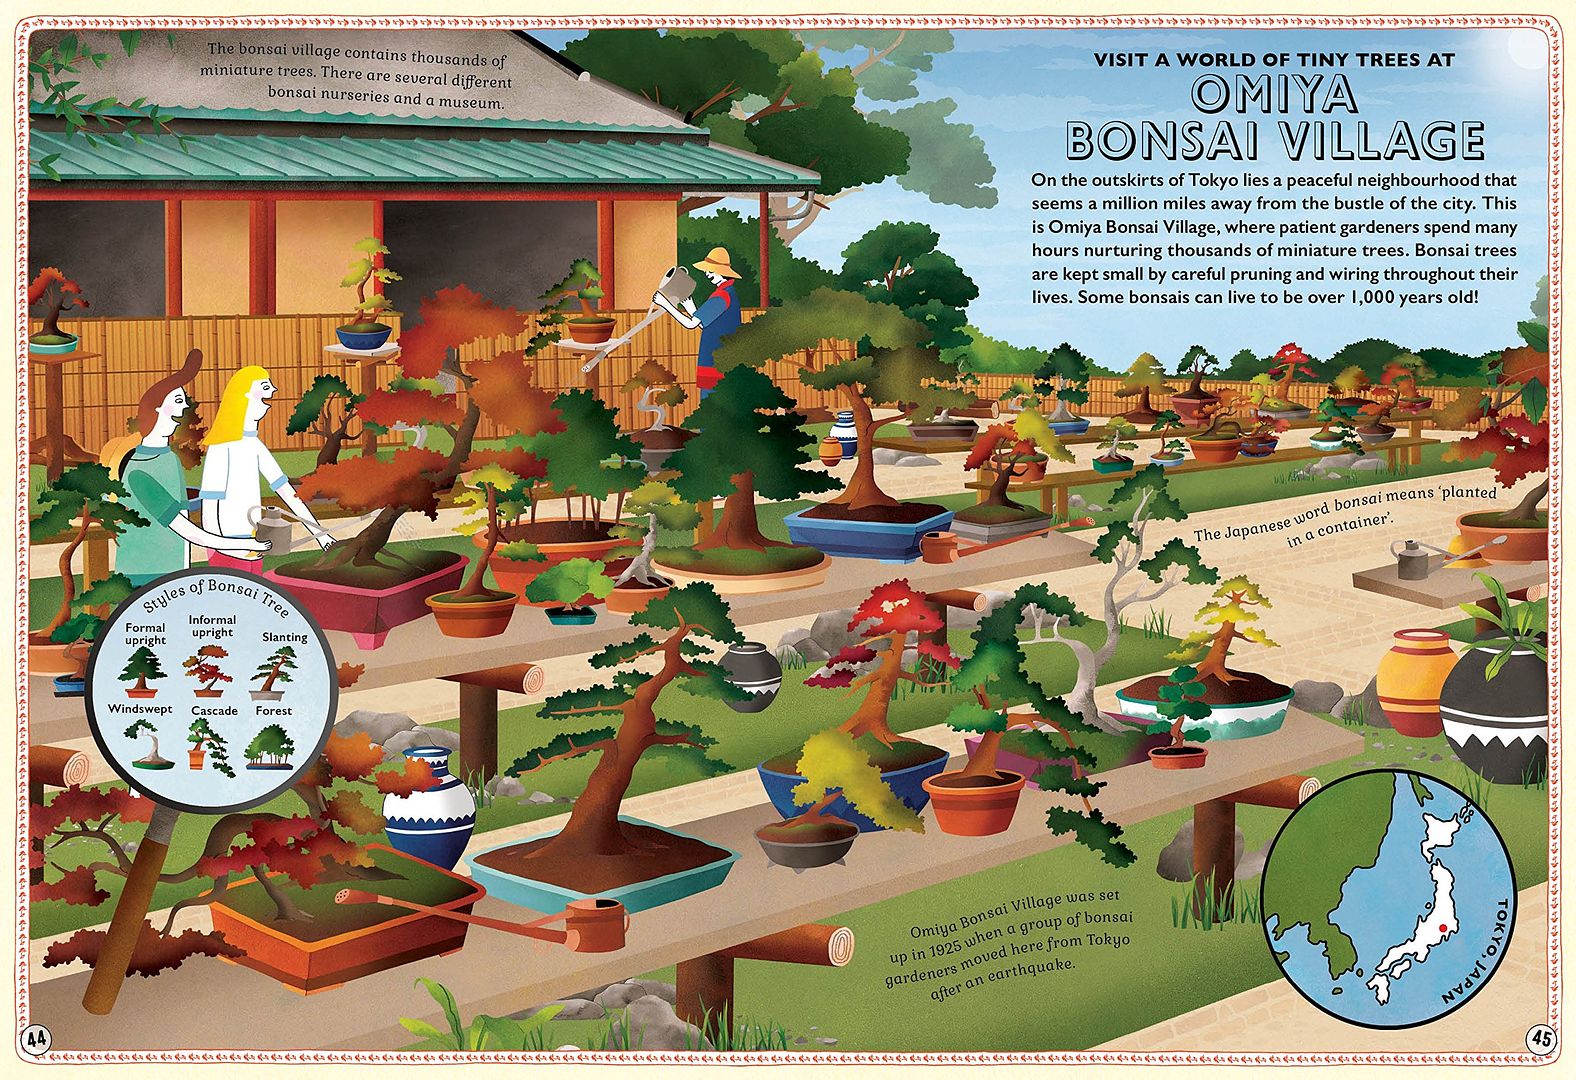 The Omiya Bonsai Village: one of dozens of small-scale wonders to explore in the Atlas of Miniature Adventures